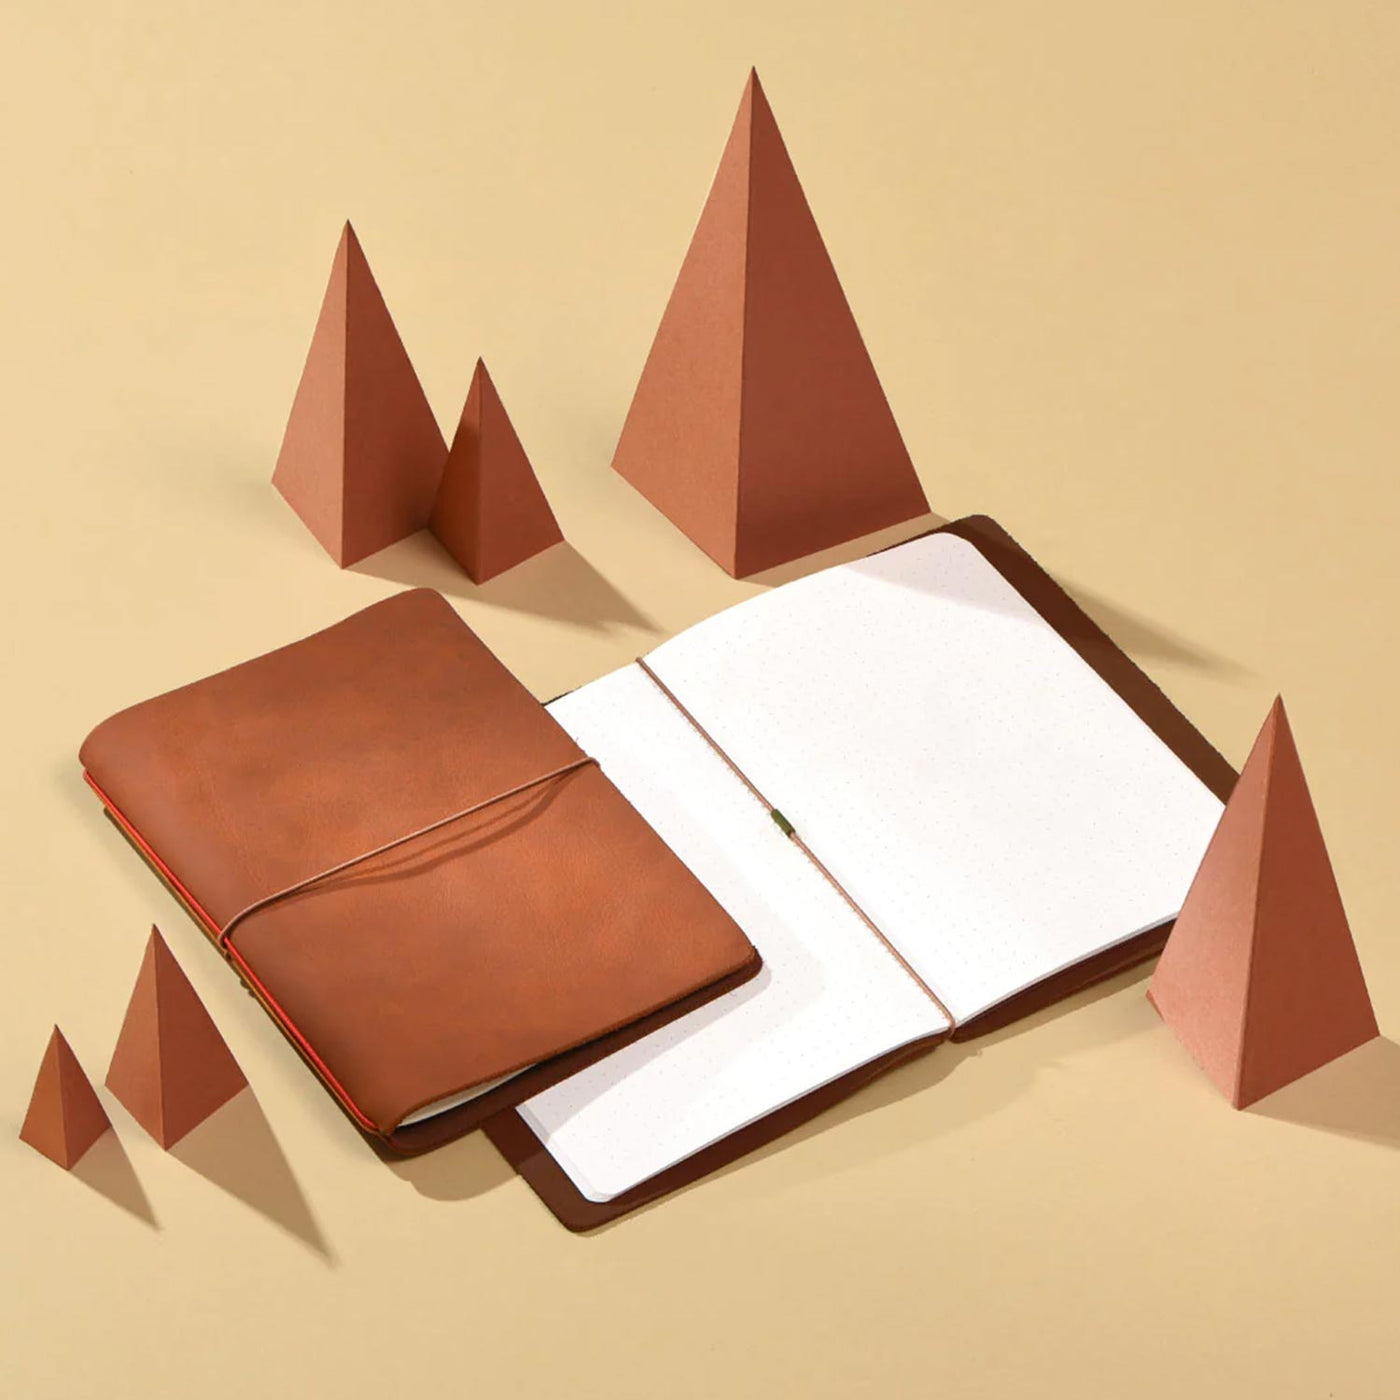 Endless Explorer Refillable Leather Journal - Brown